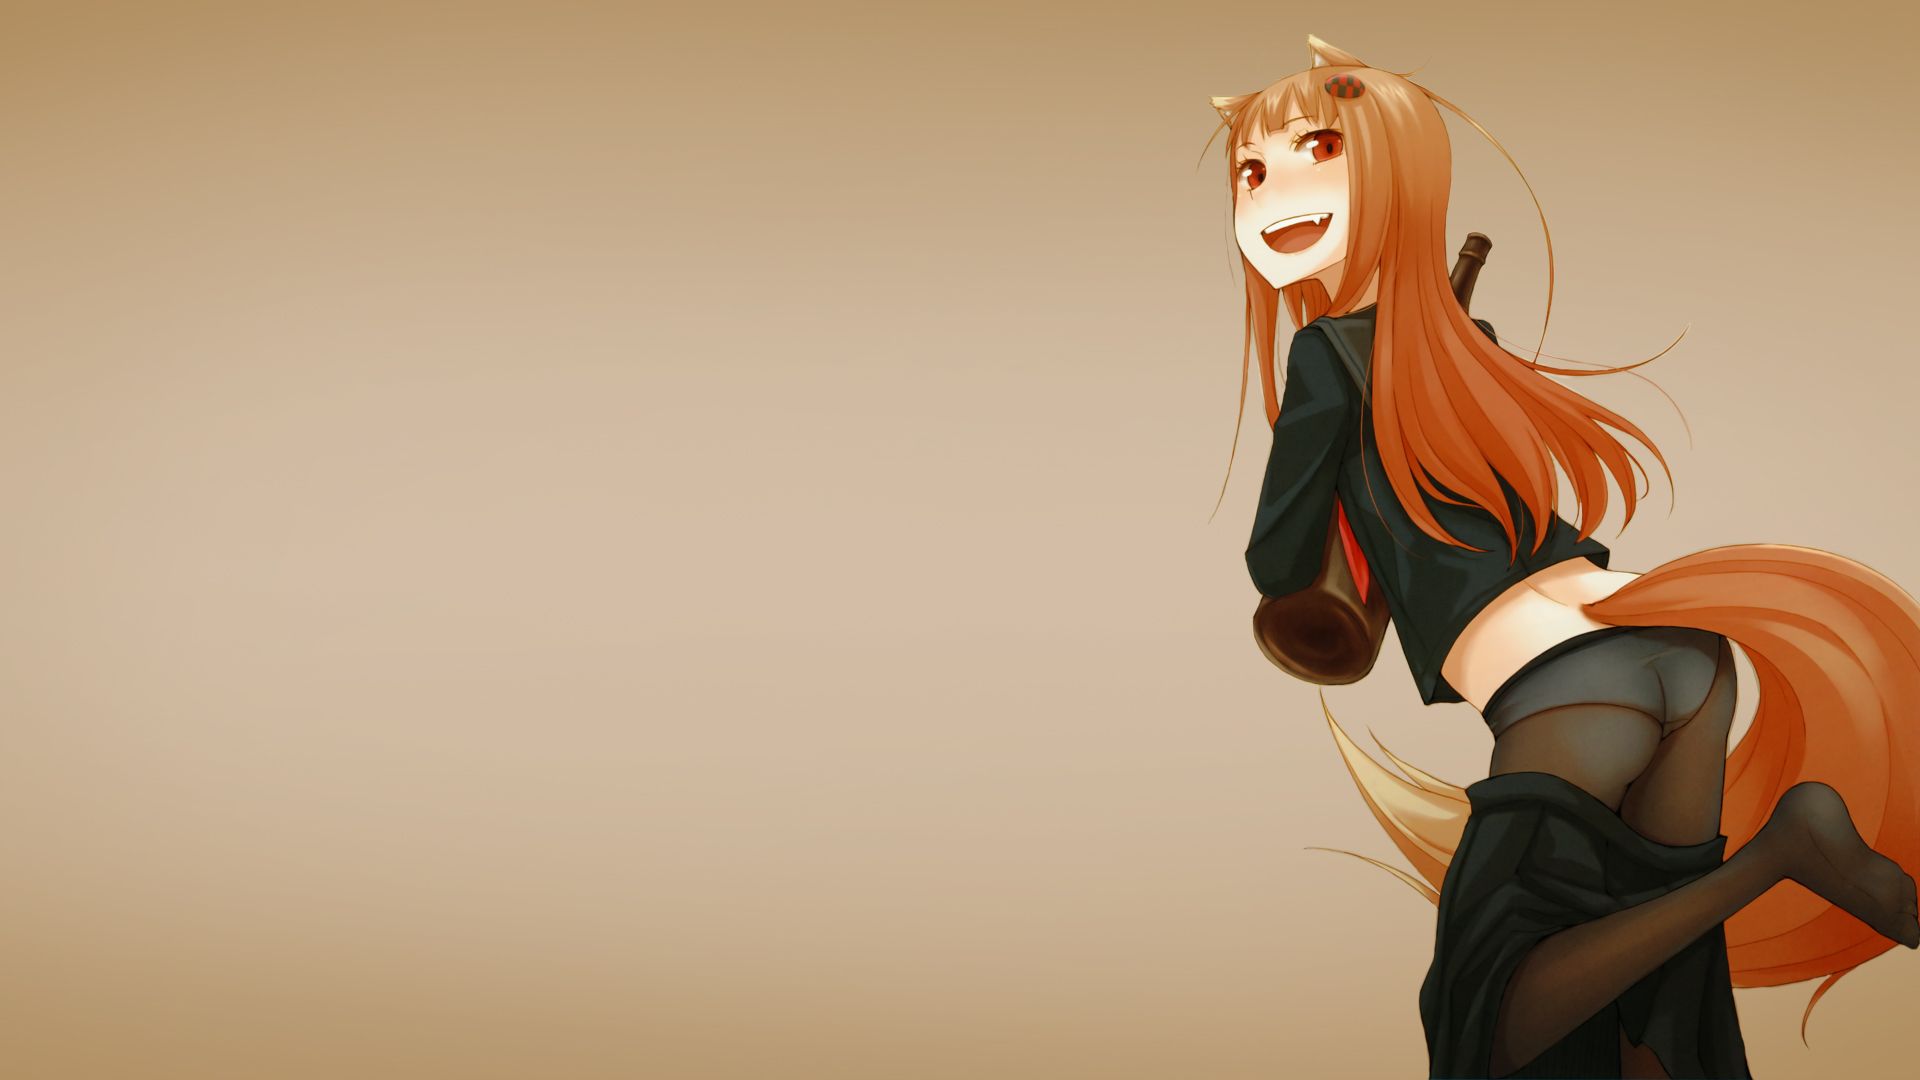 Spice and Wolf Wallpaper. Pumpkin Spice Wallpaper, Pumpkin Spice Latte Wallpaper and Spice Wolf Wallpaper